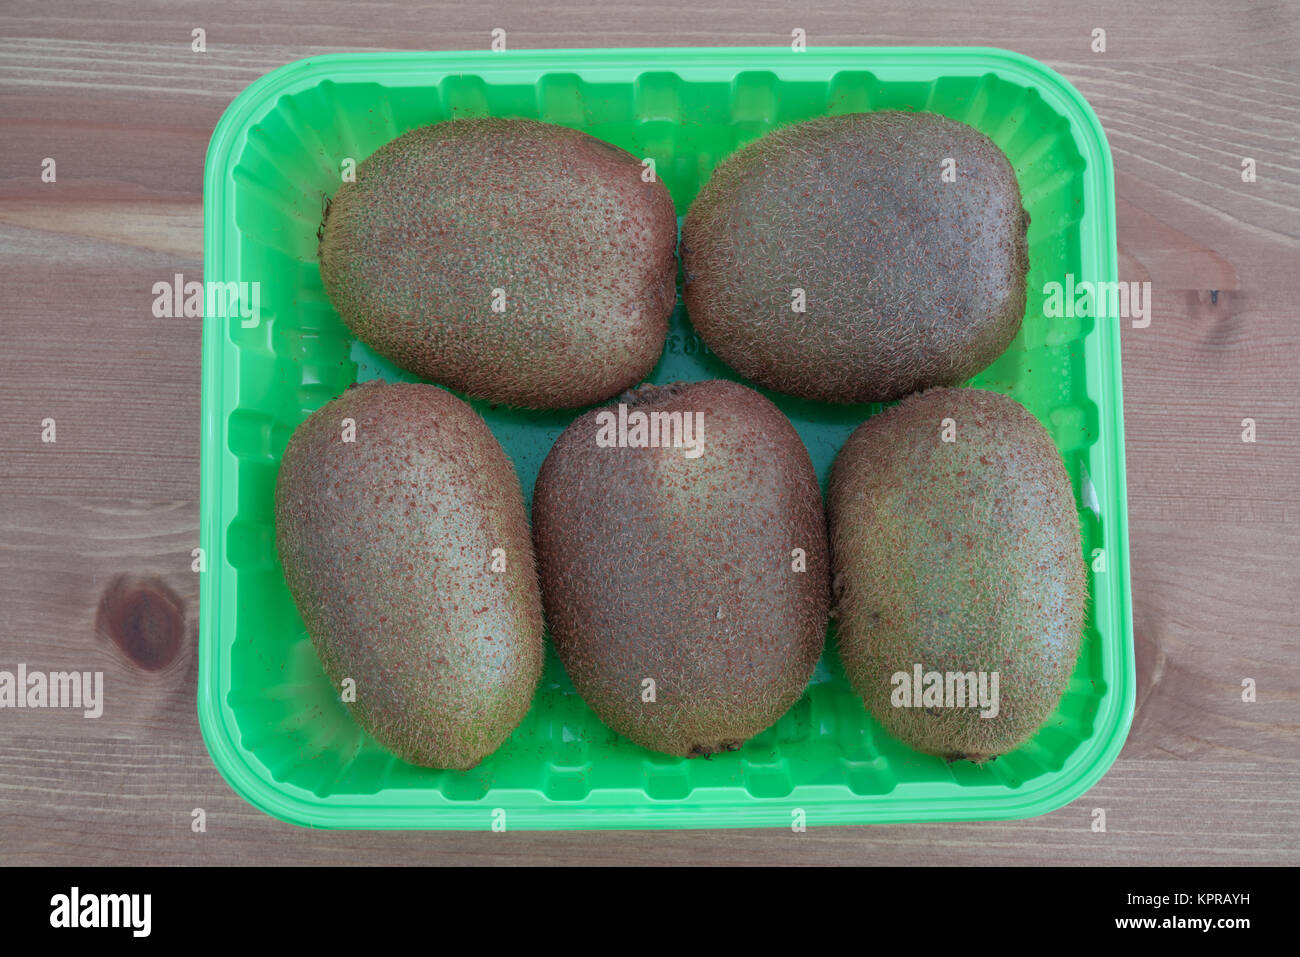 Five Kiwi fruits in a green box isolated on wooden background Stock Photo